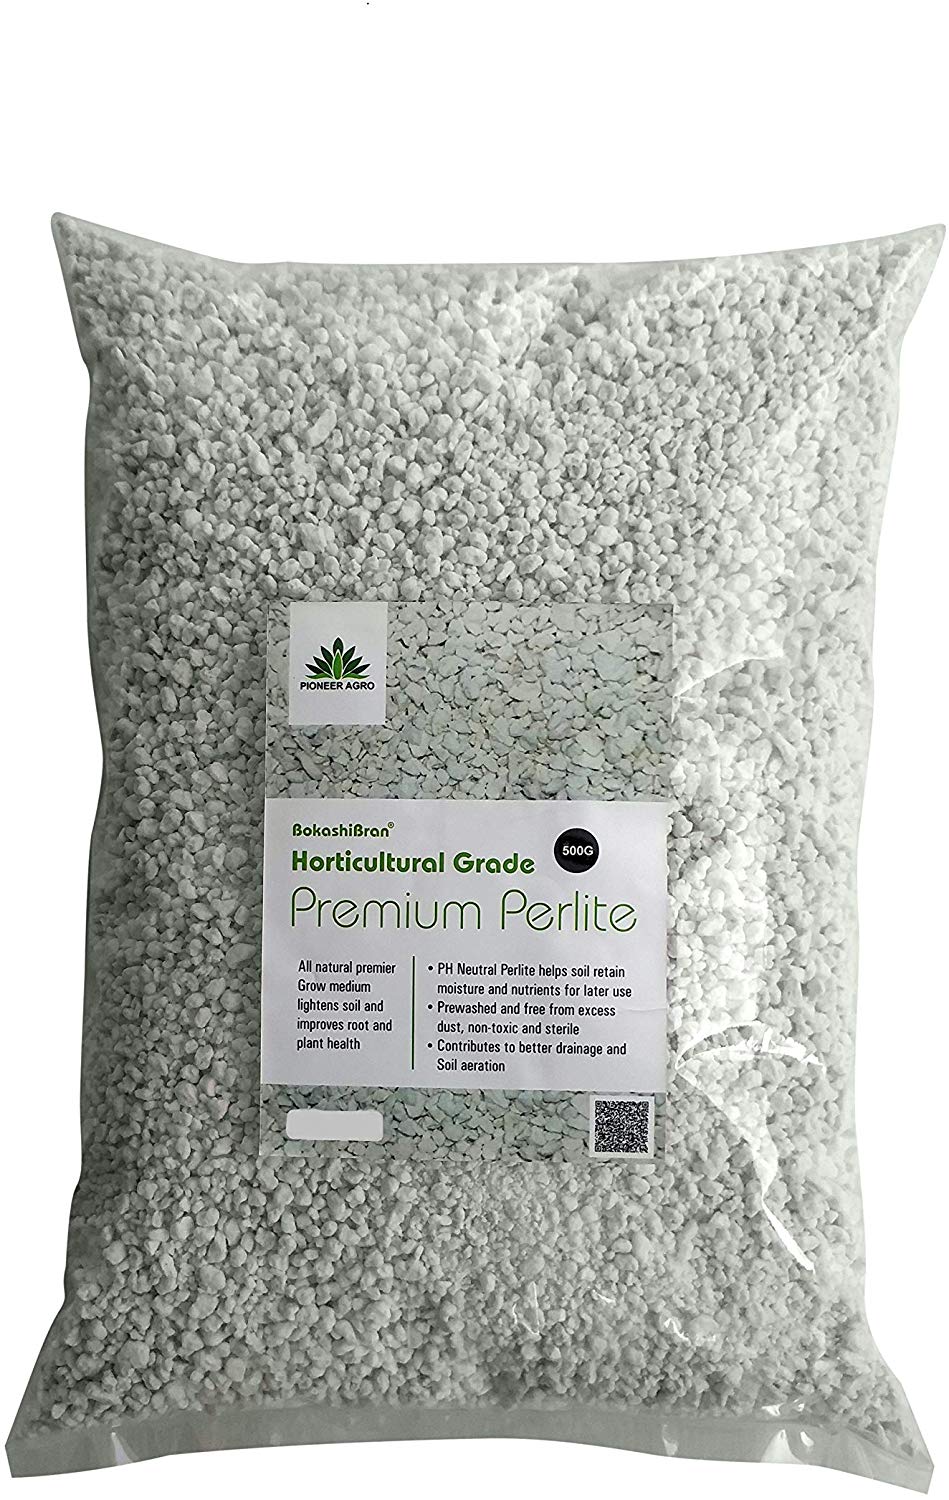 Perlite Pack for Floriculture